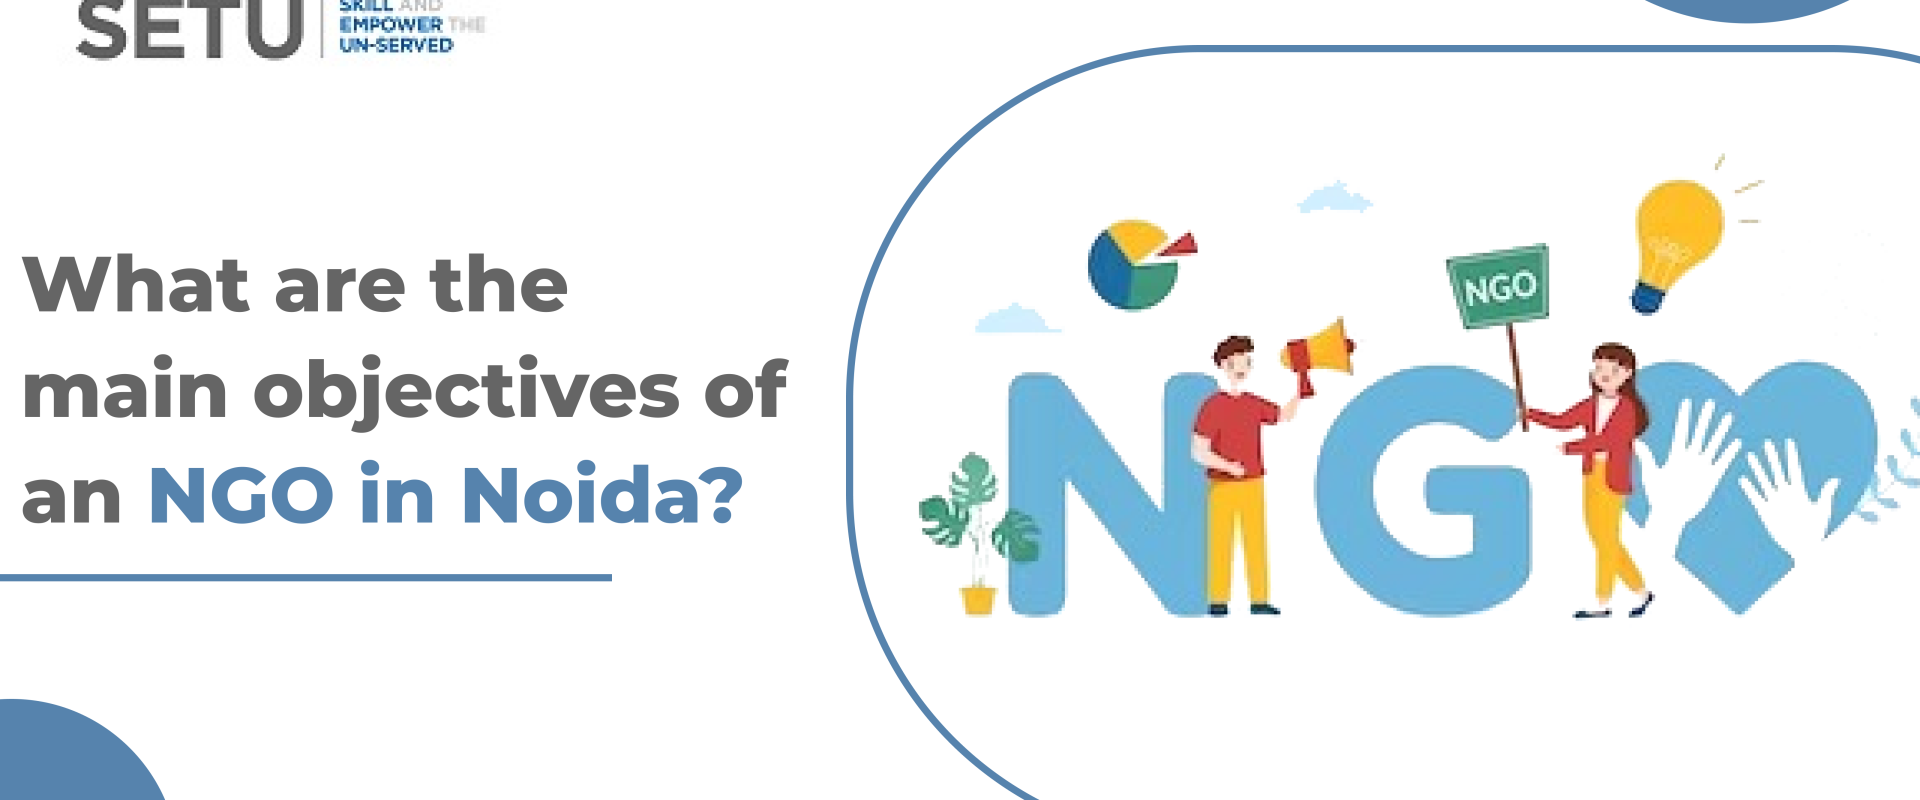 objectives of an NGO in Noida